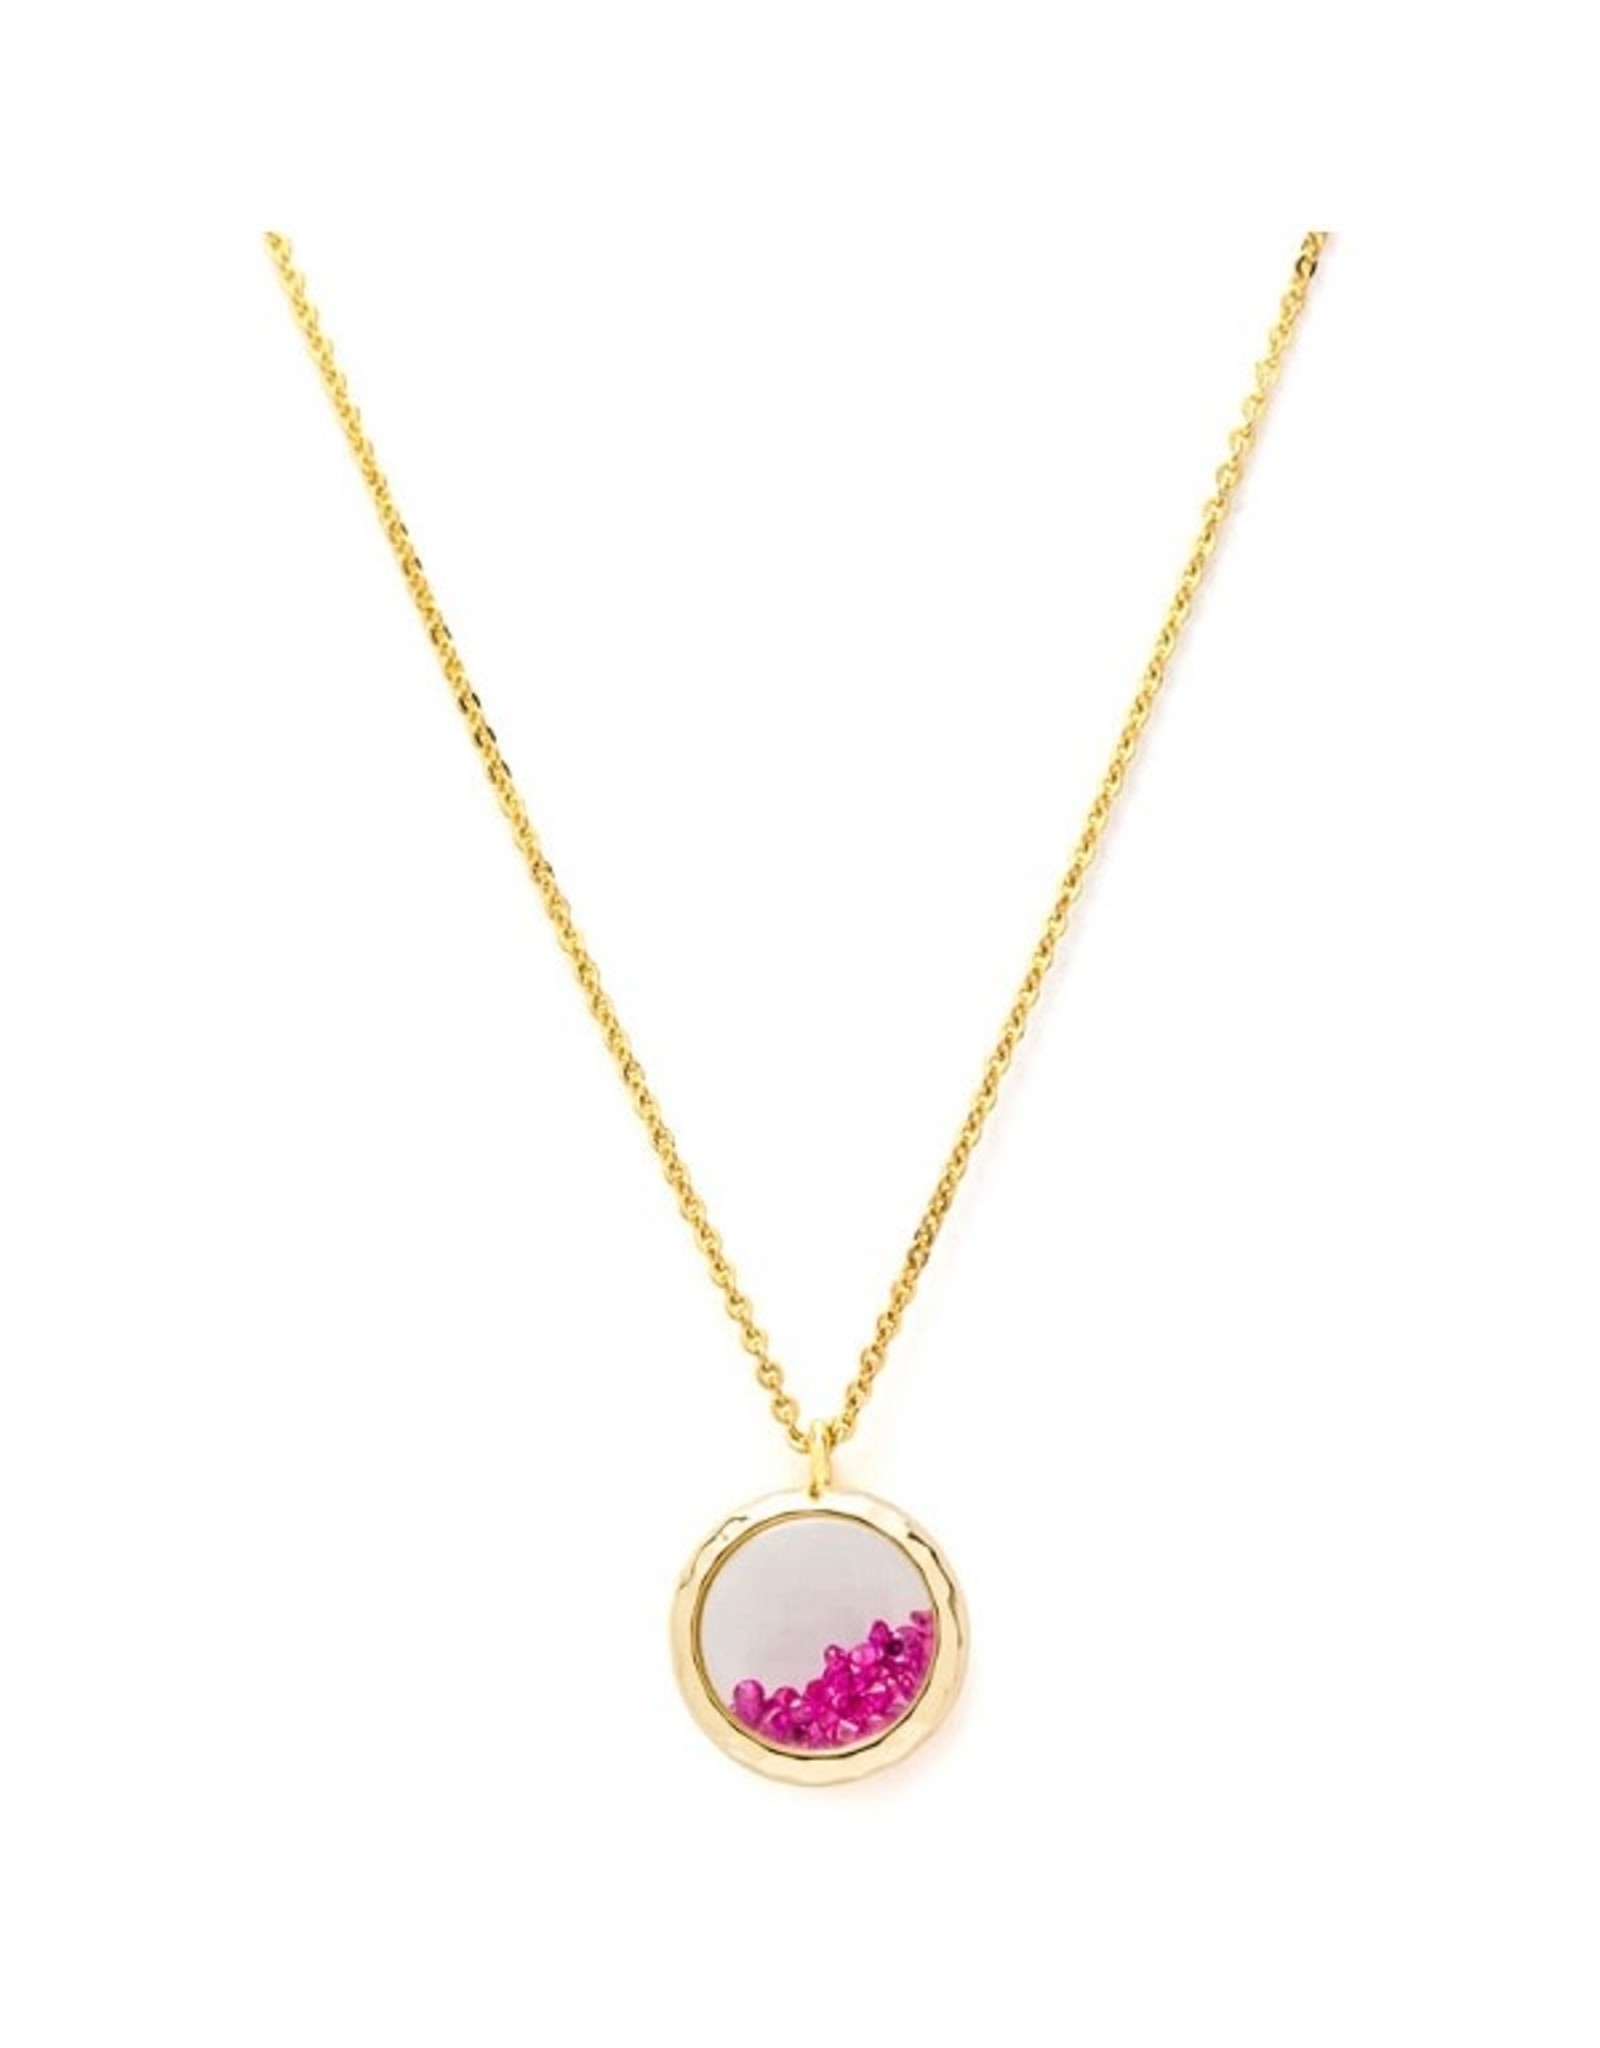 Laura Janelle BIRTHSTONE GOLD NECKLACE